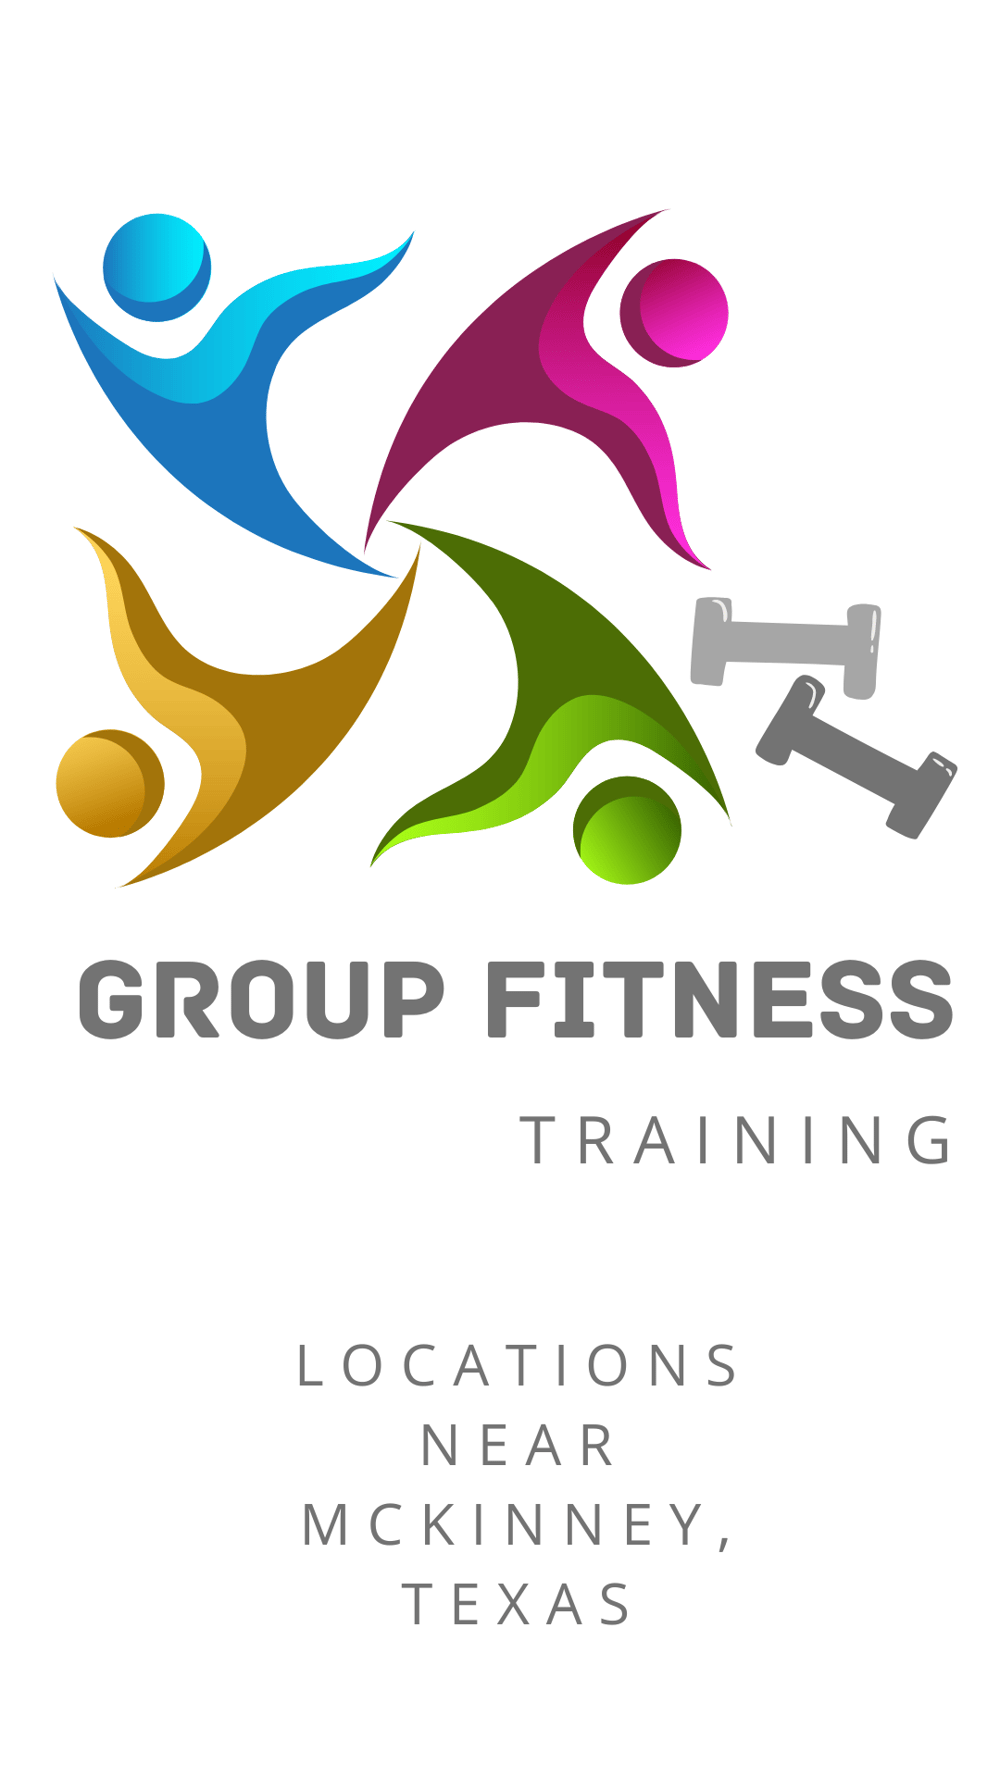 Group fitness training icon for individuals near McKinney, Texas